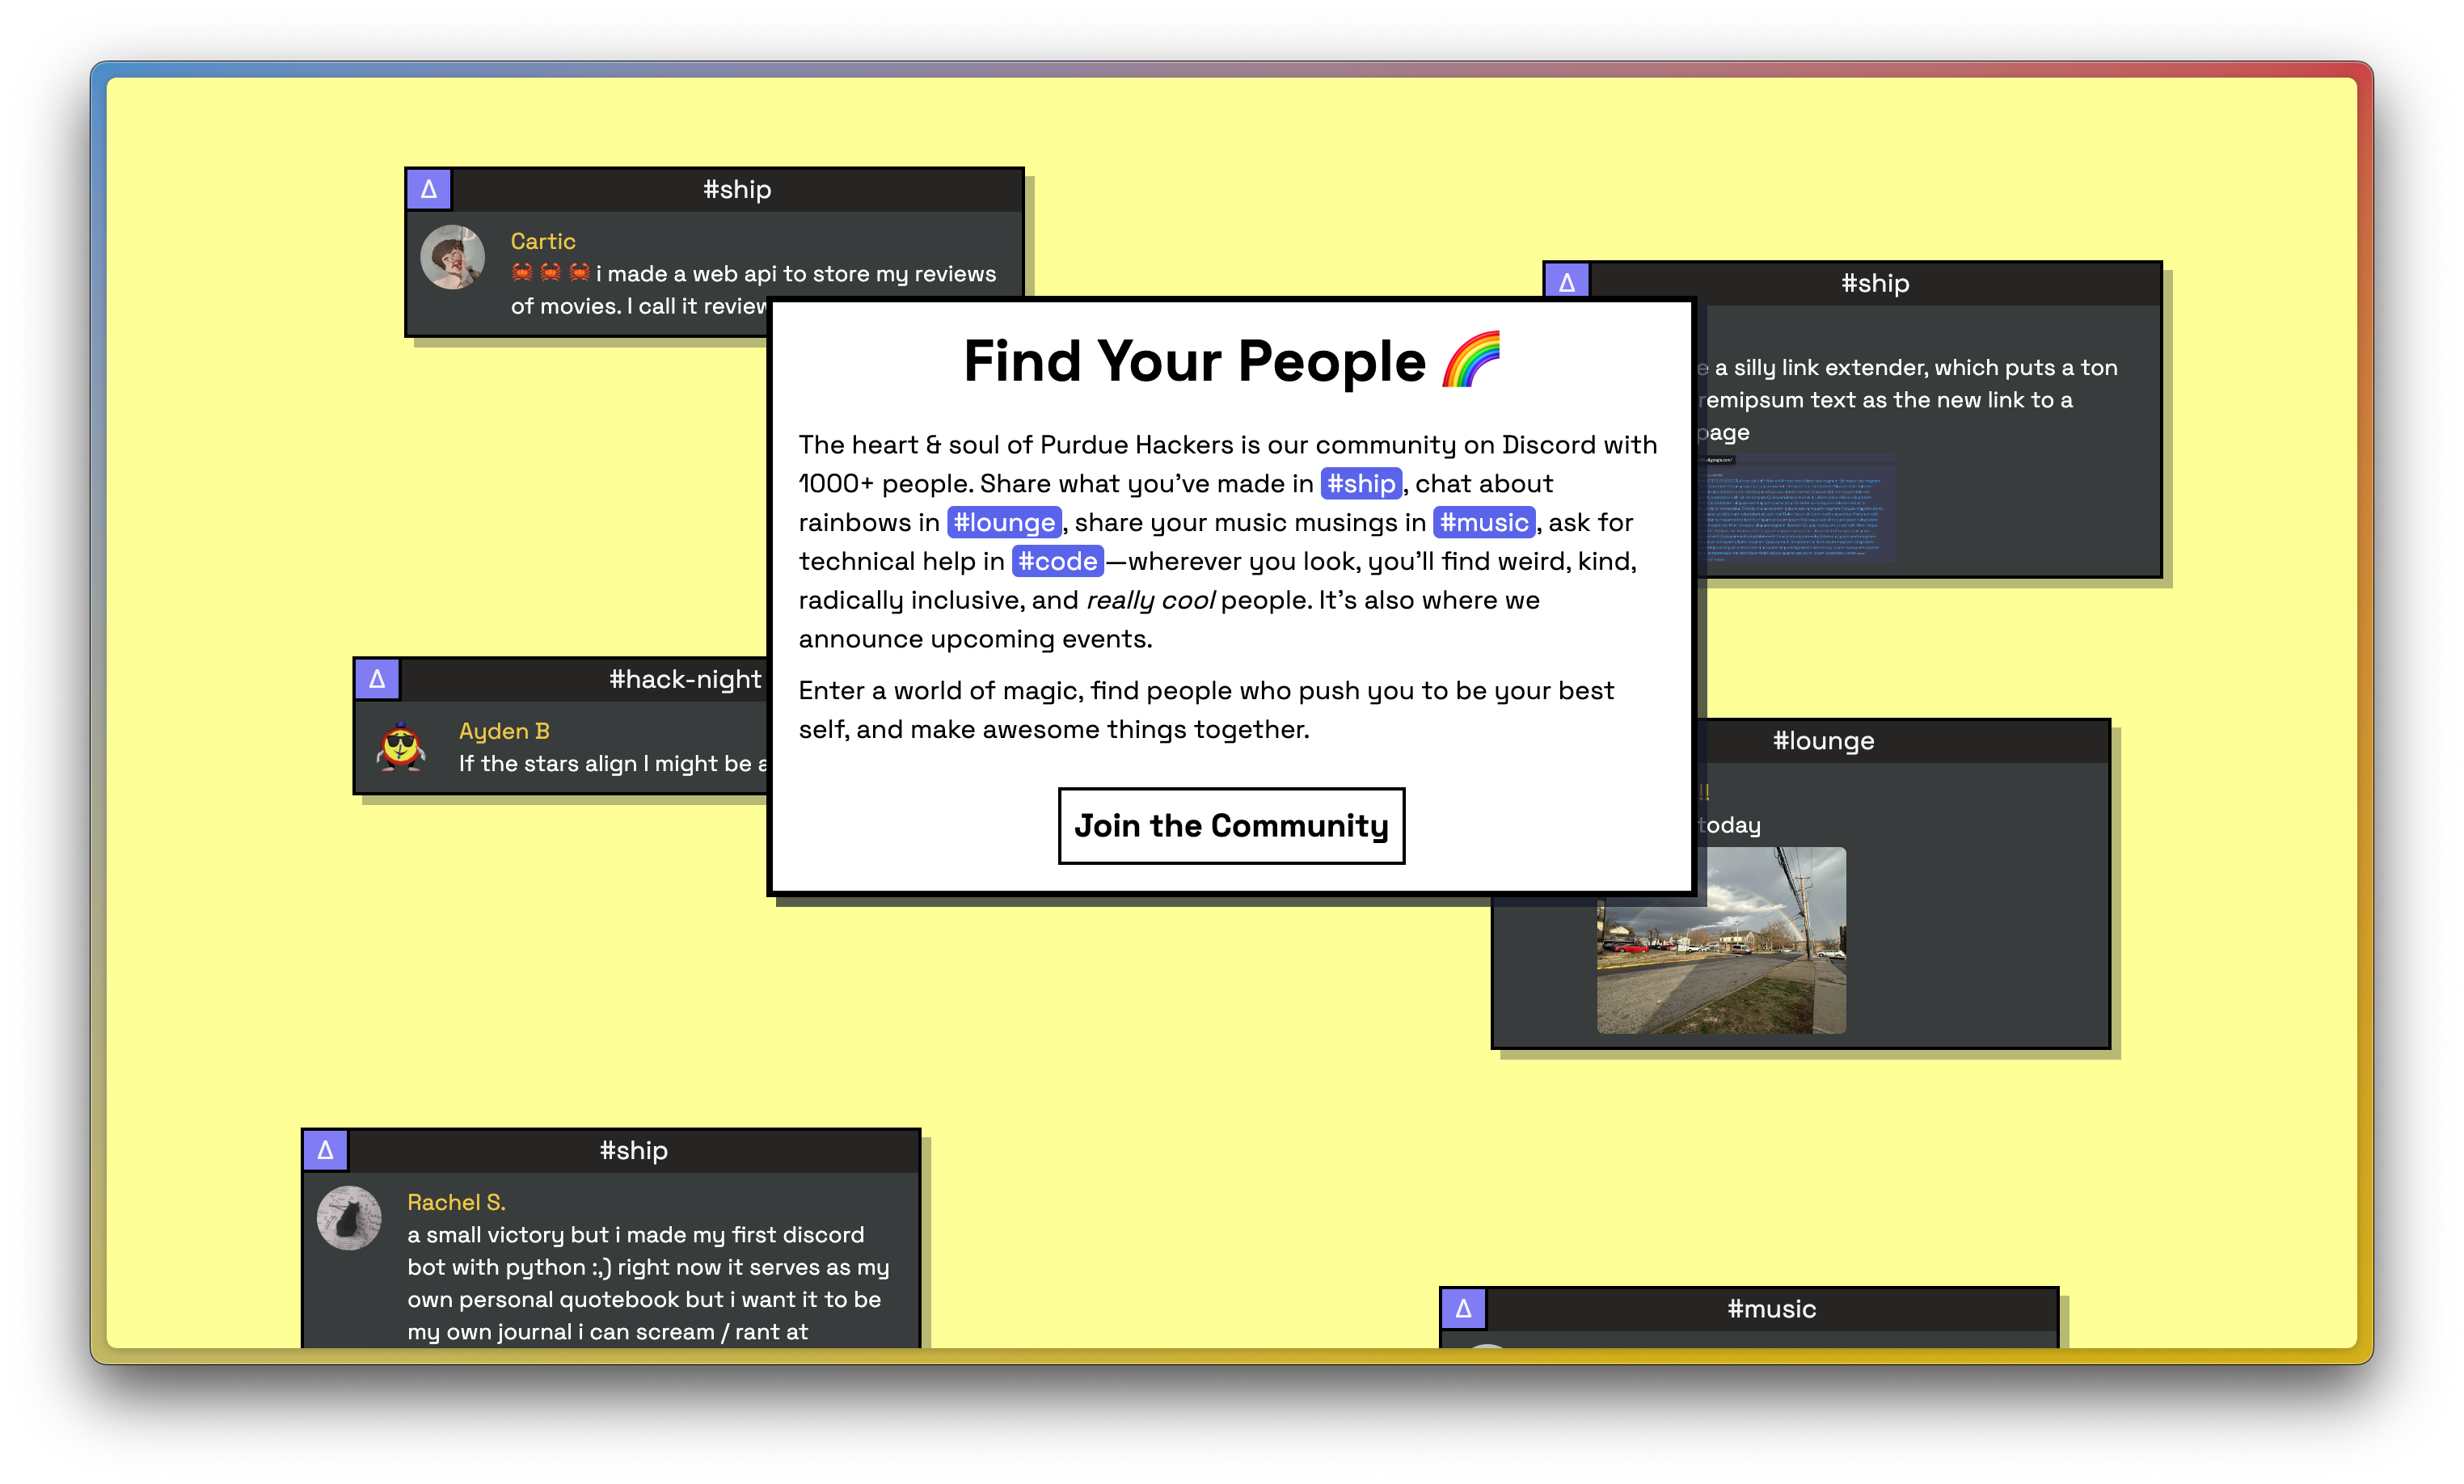 screenshot of a website with a bright yellow background, discord messages scattered throughout, and a card with text describing the community